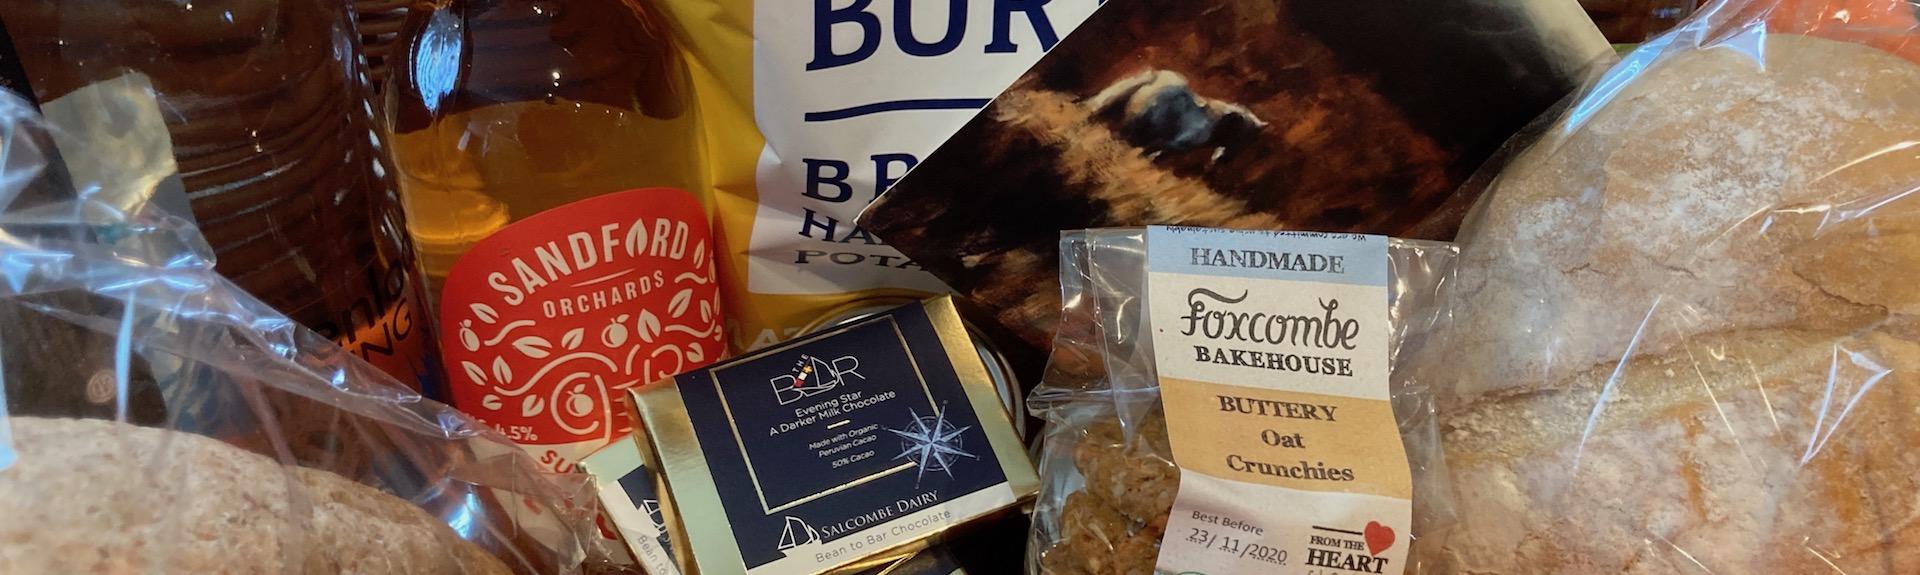 A holiday cottage welcome pack featuring luxury food and drink items